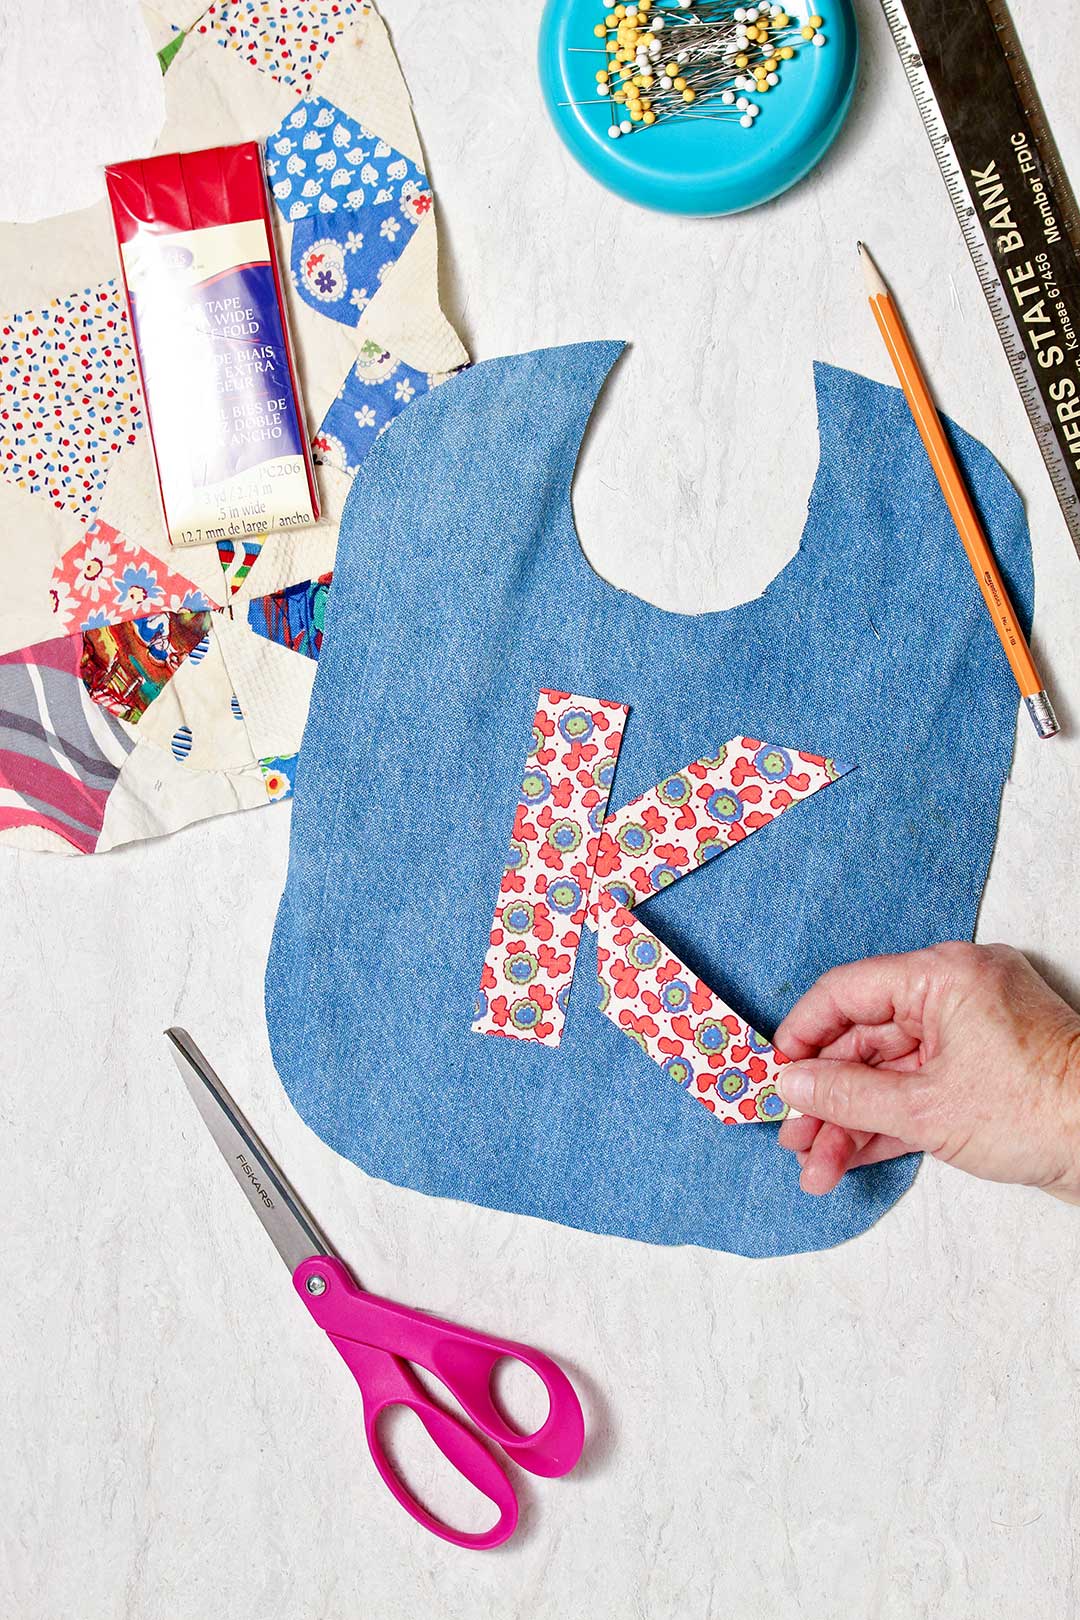 Hand placing a patterned piece of fabric to make the letter "K" on a blue bib base with supplies near by.